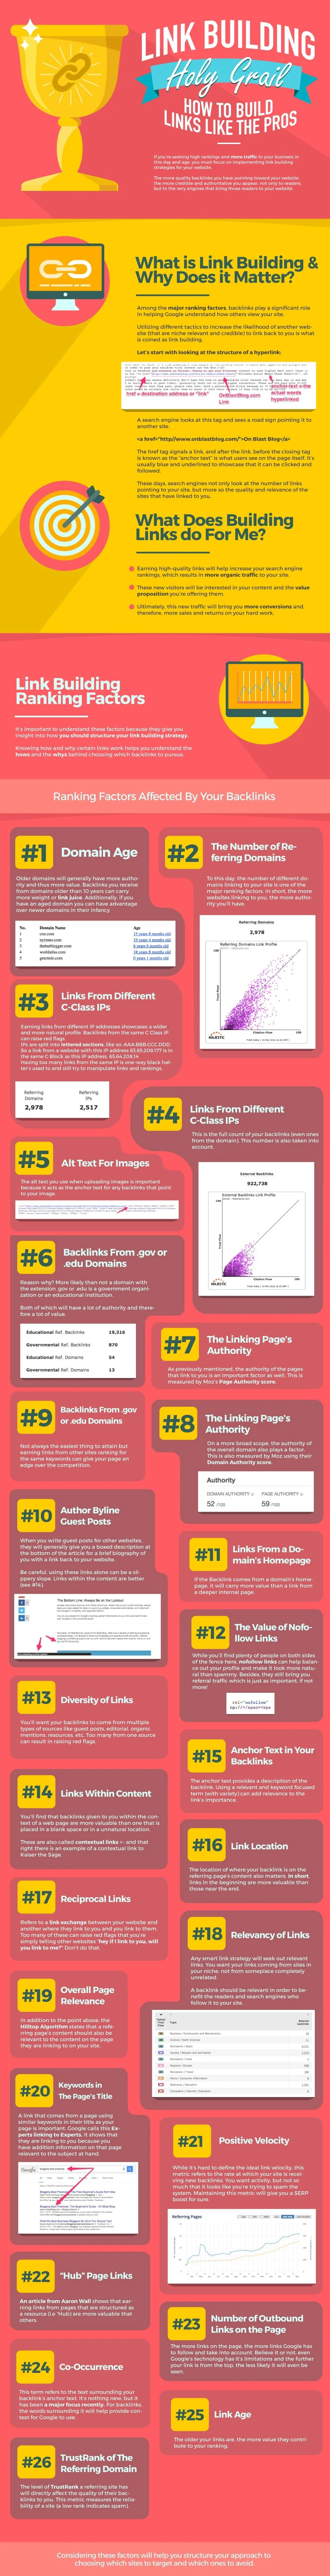 Link Building Holy Grail: How to Build Links Like the Pros - #infographic